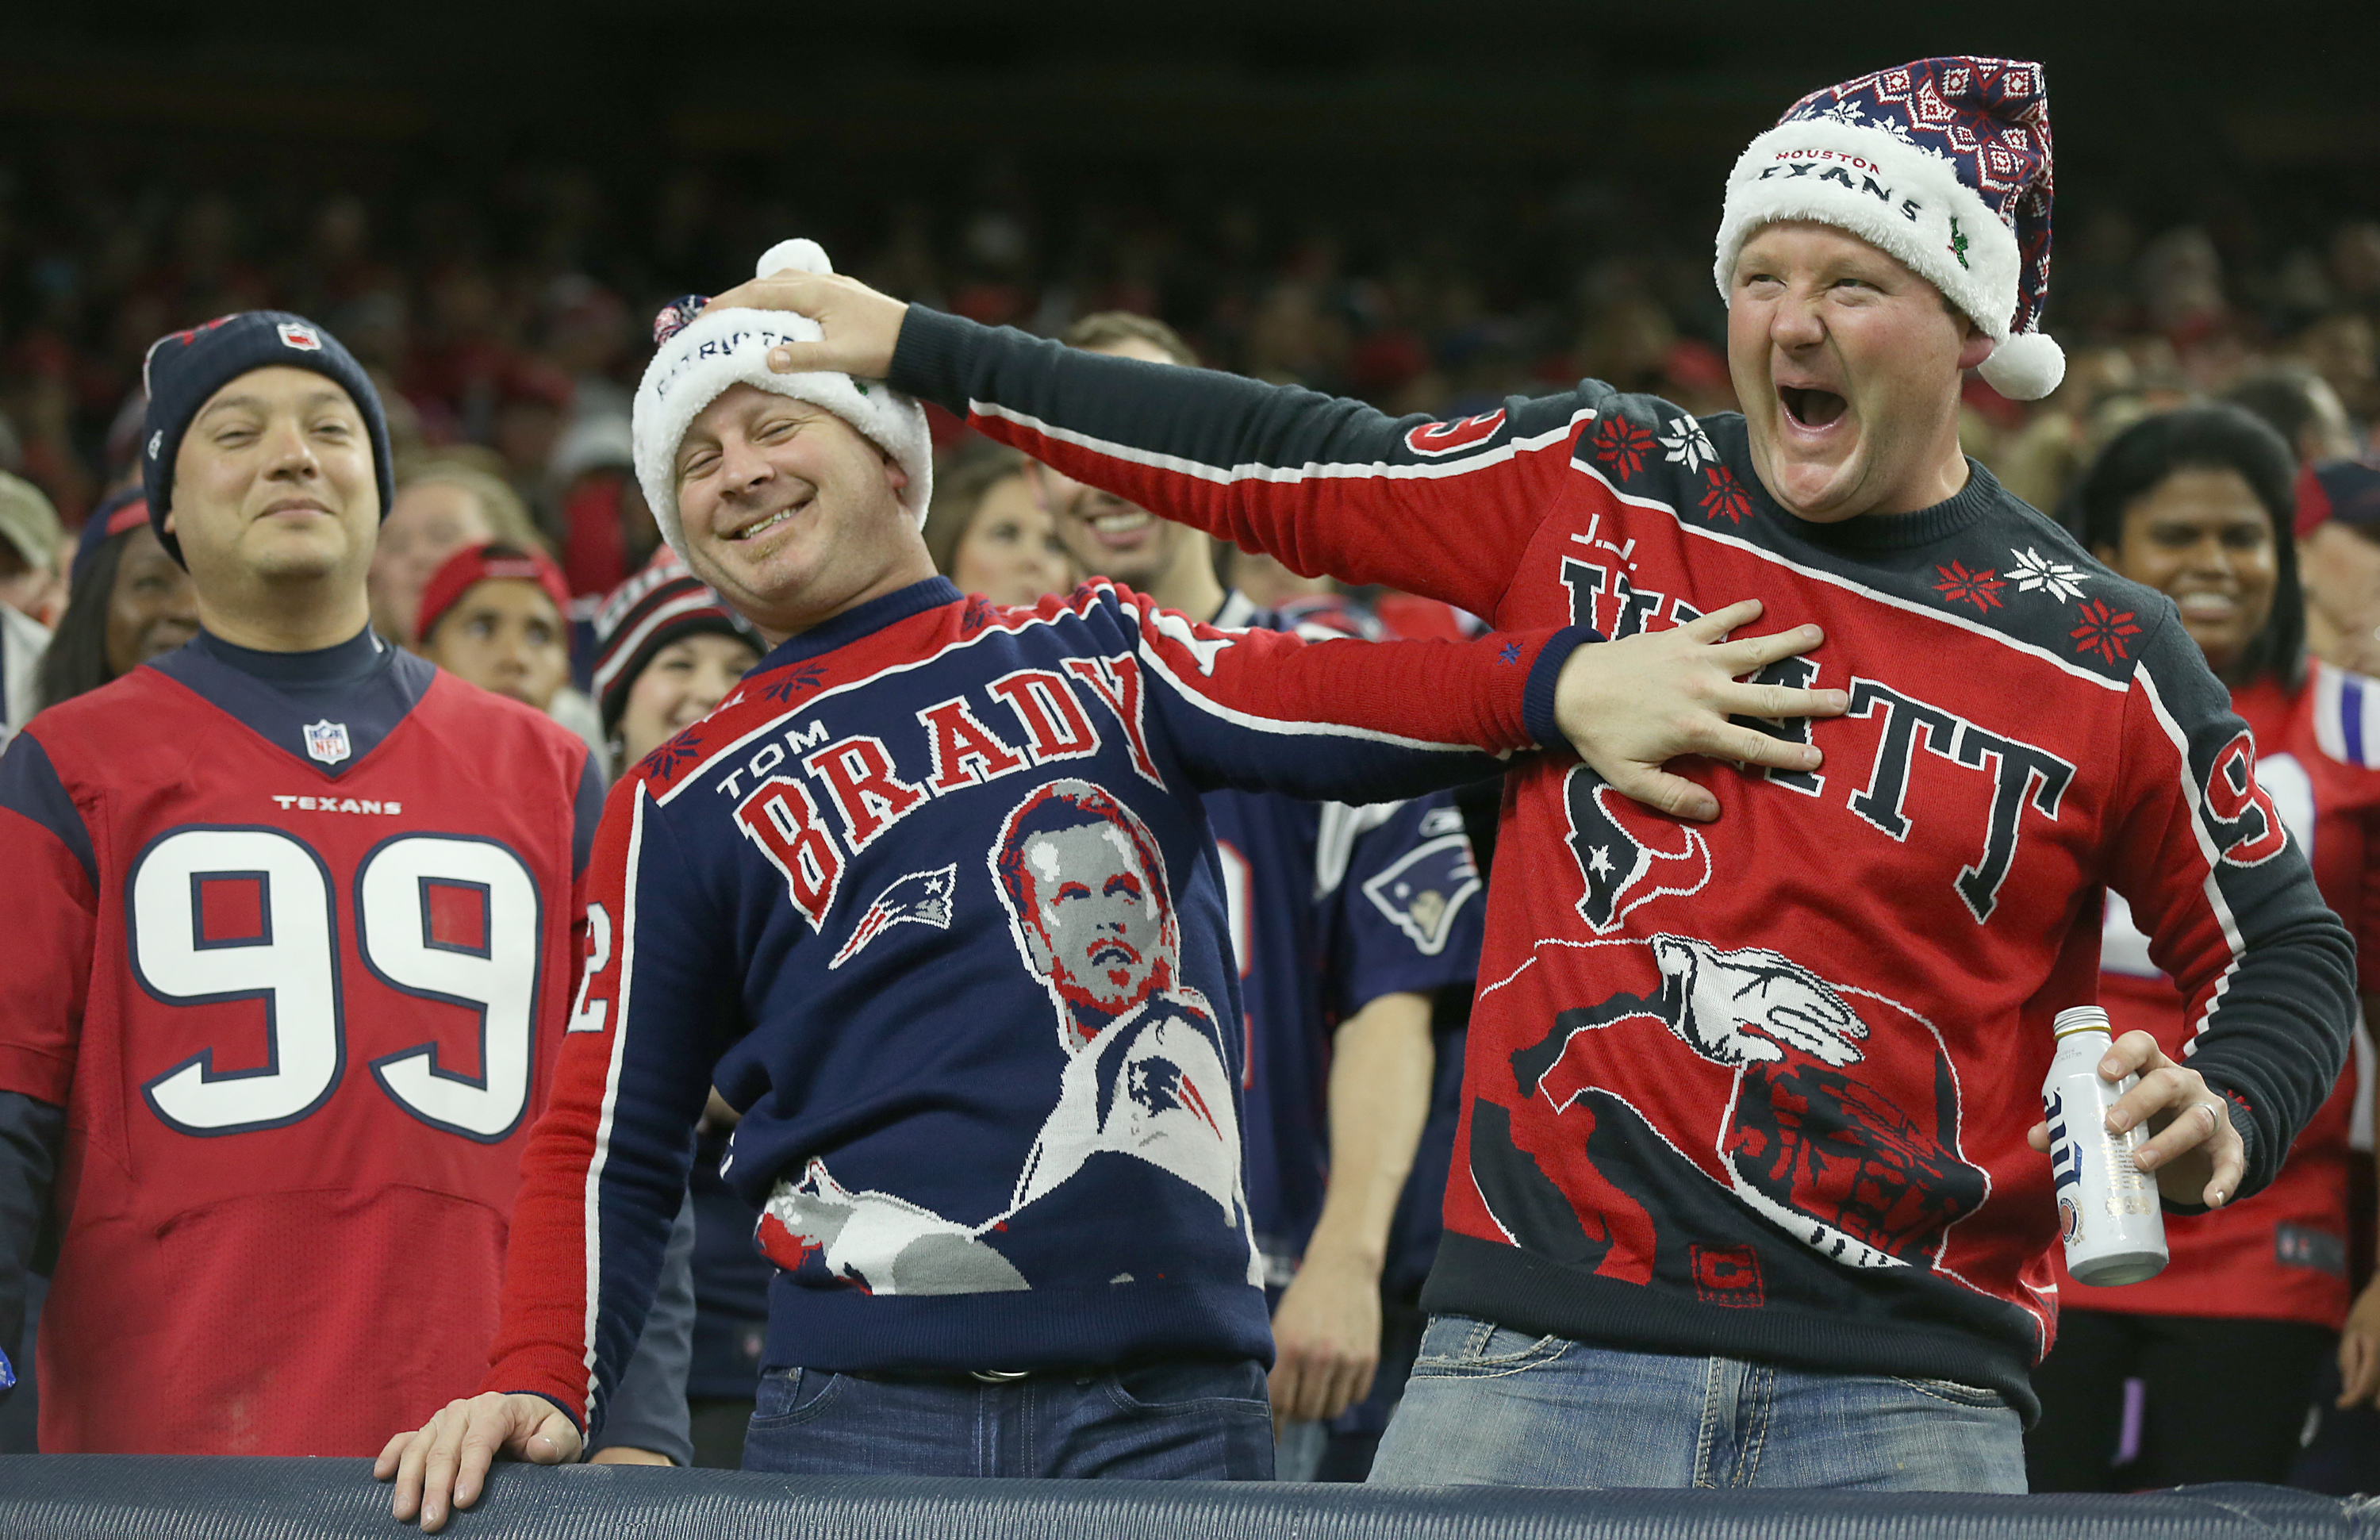 Fans of the Patriots and Texans have at it. (Photo by Scott Halleran/Getty Images)